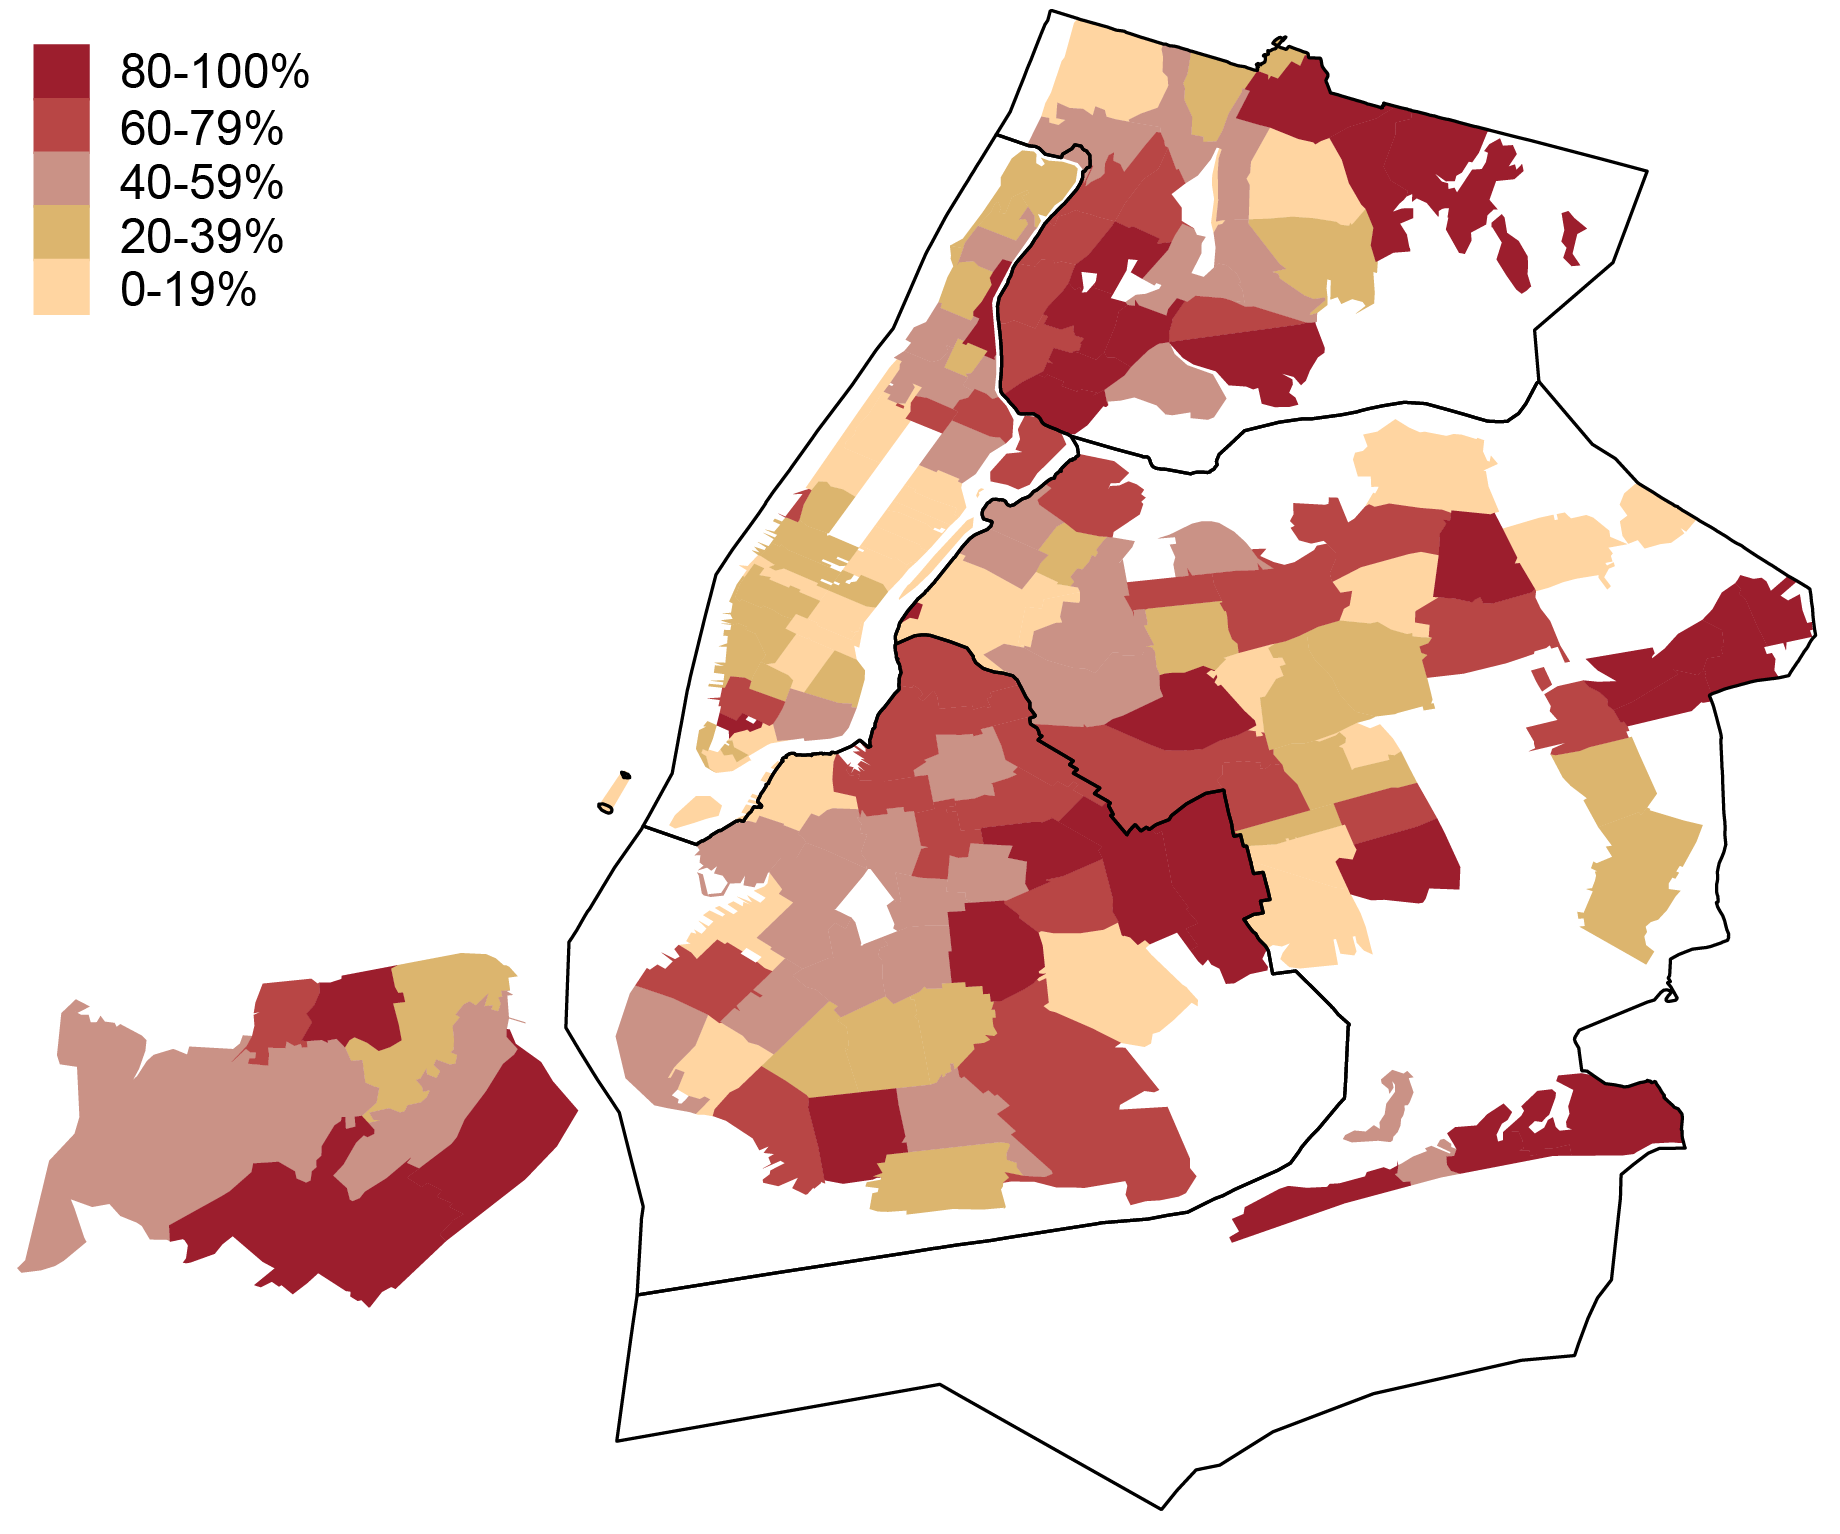 This map illustrates differences in mortgage loan-to-value ratios by zip code across New York City. The legend divides zip codes into five bands from 0-100 percent.